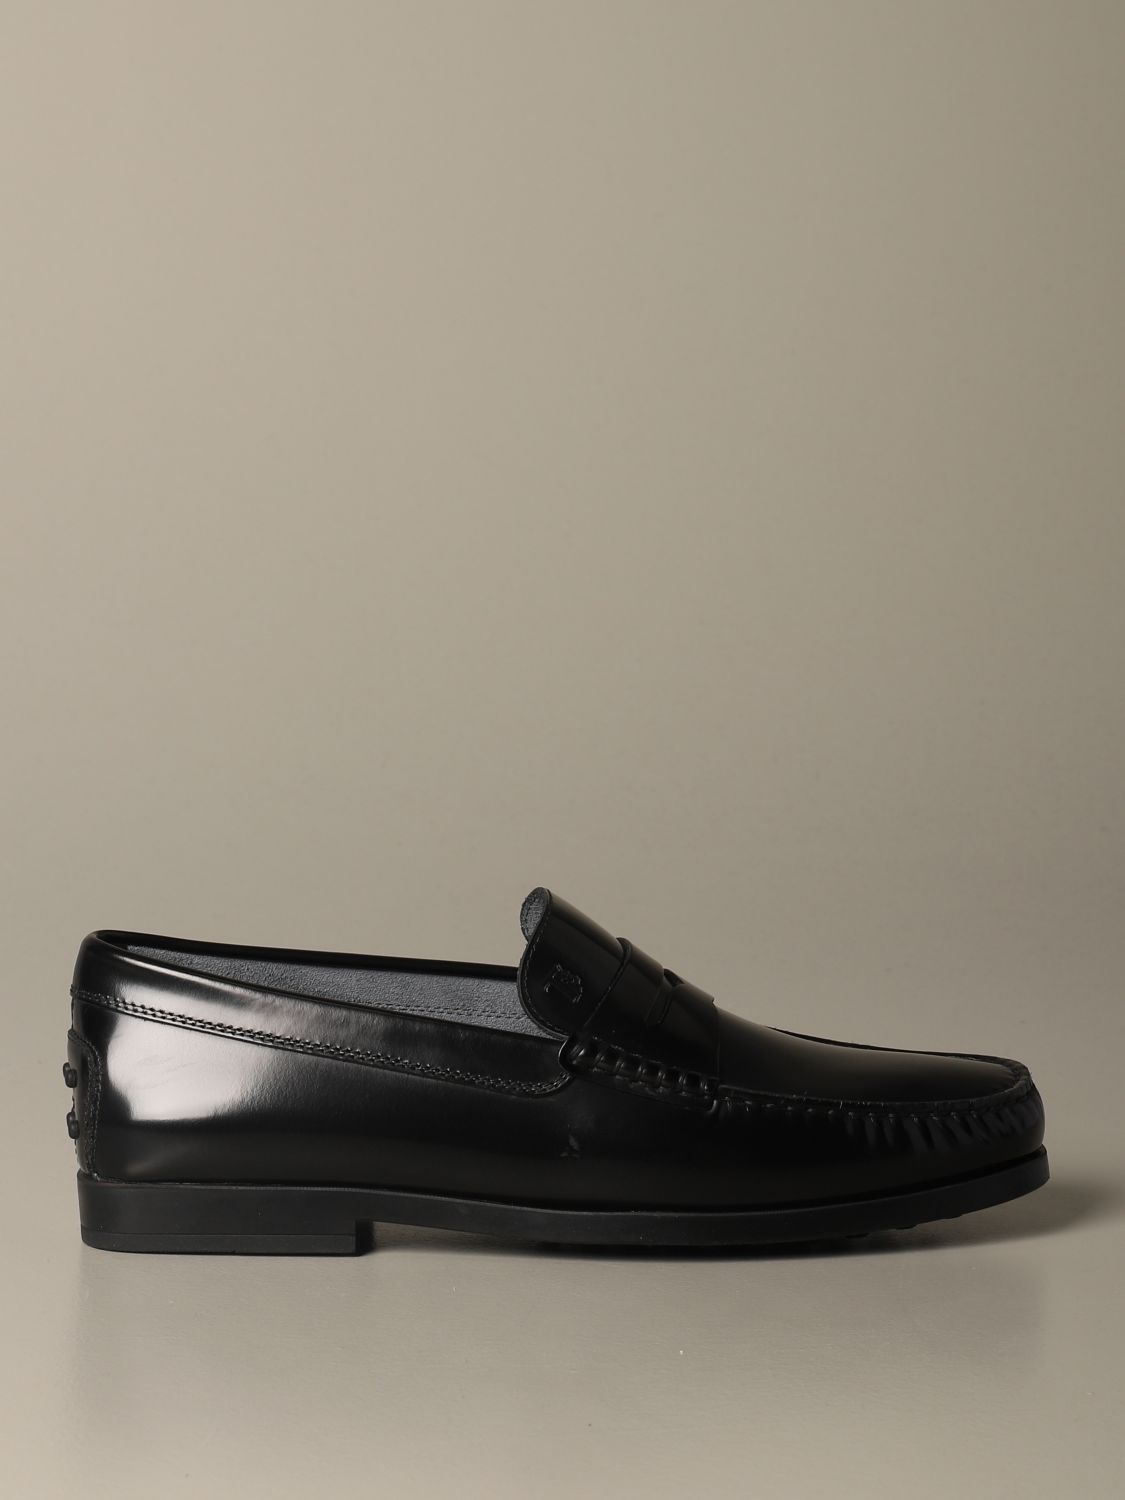 tods mens black loafers